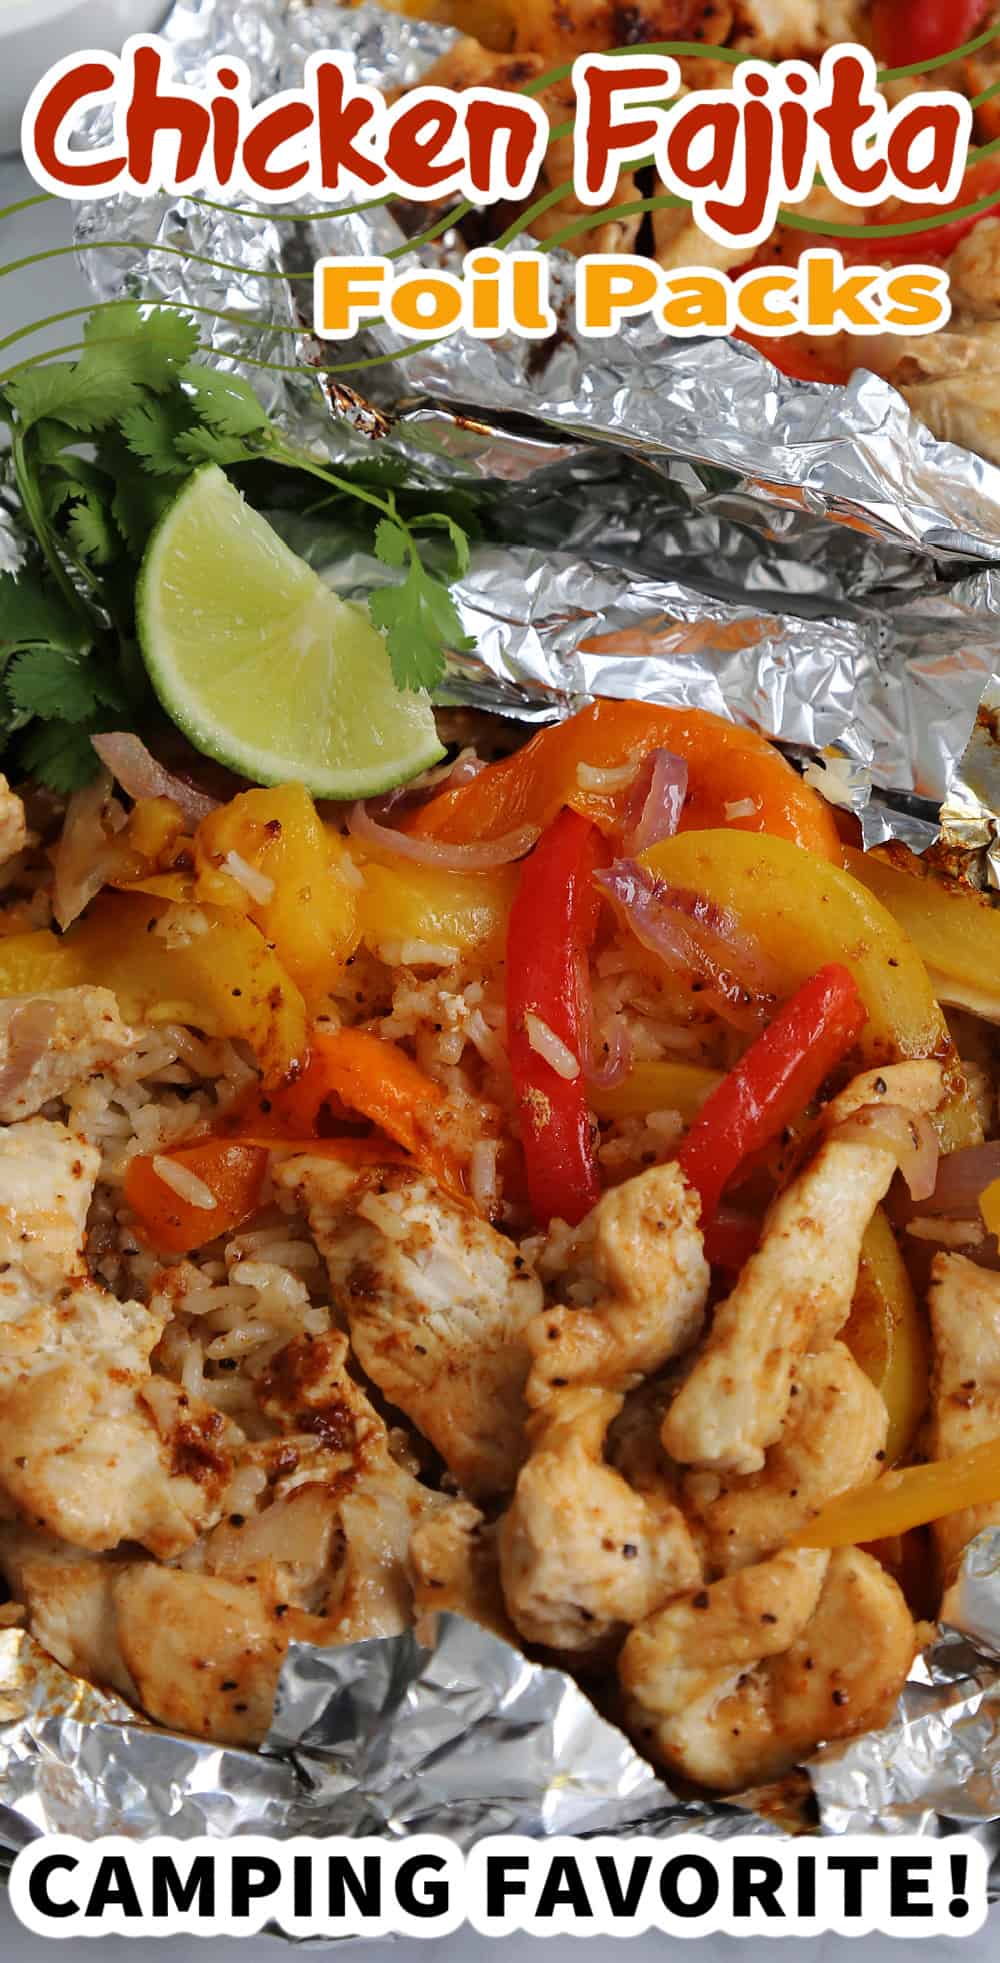 Chicken Fajita Foil Packets with text overlay